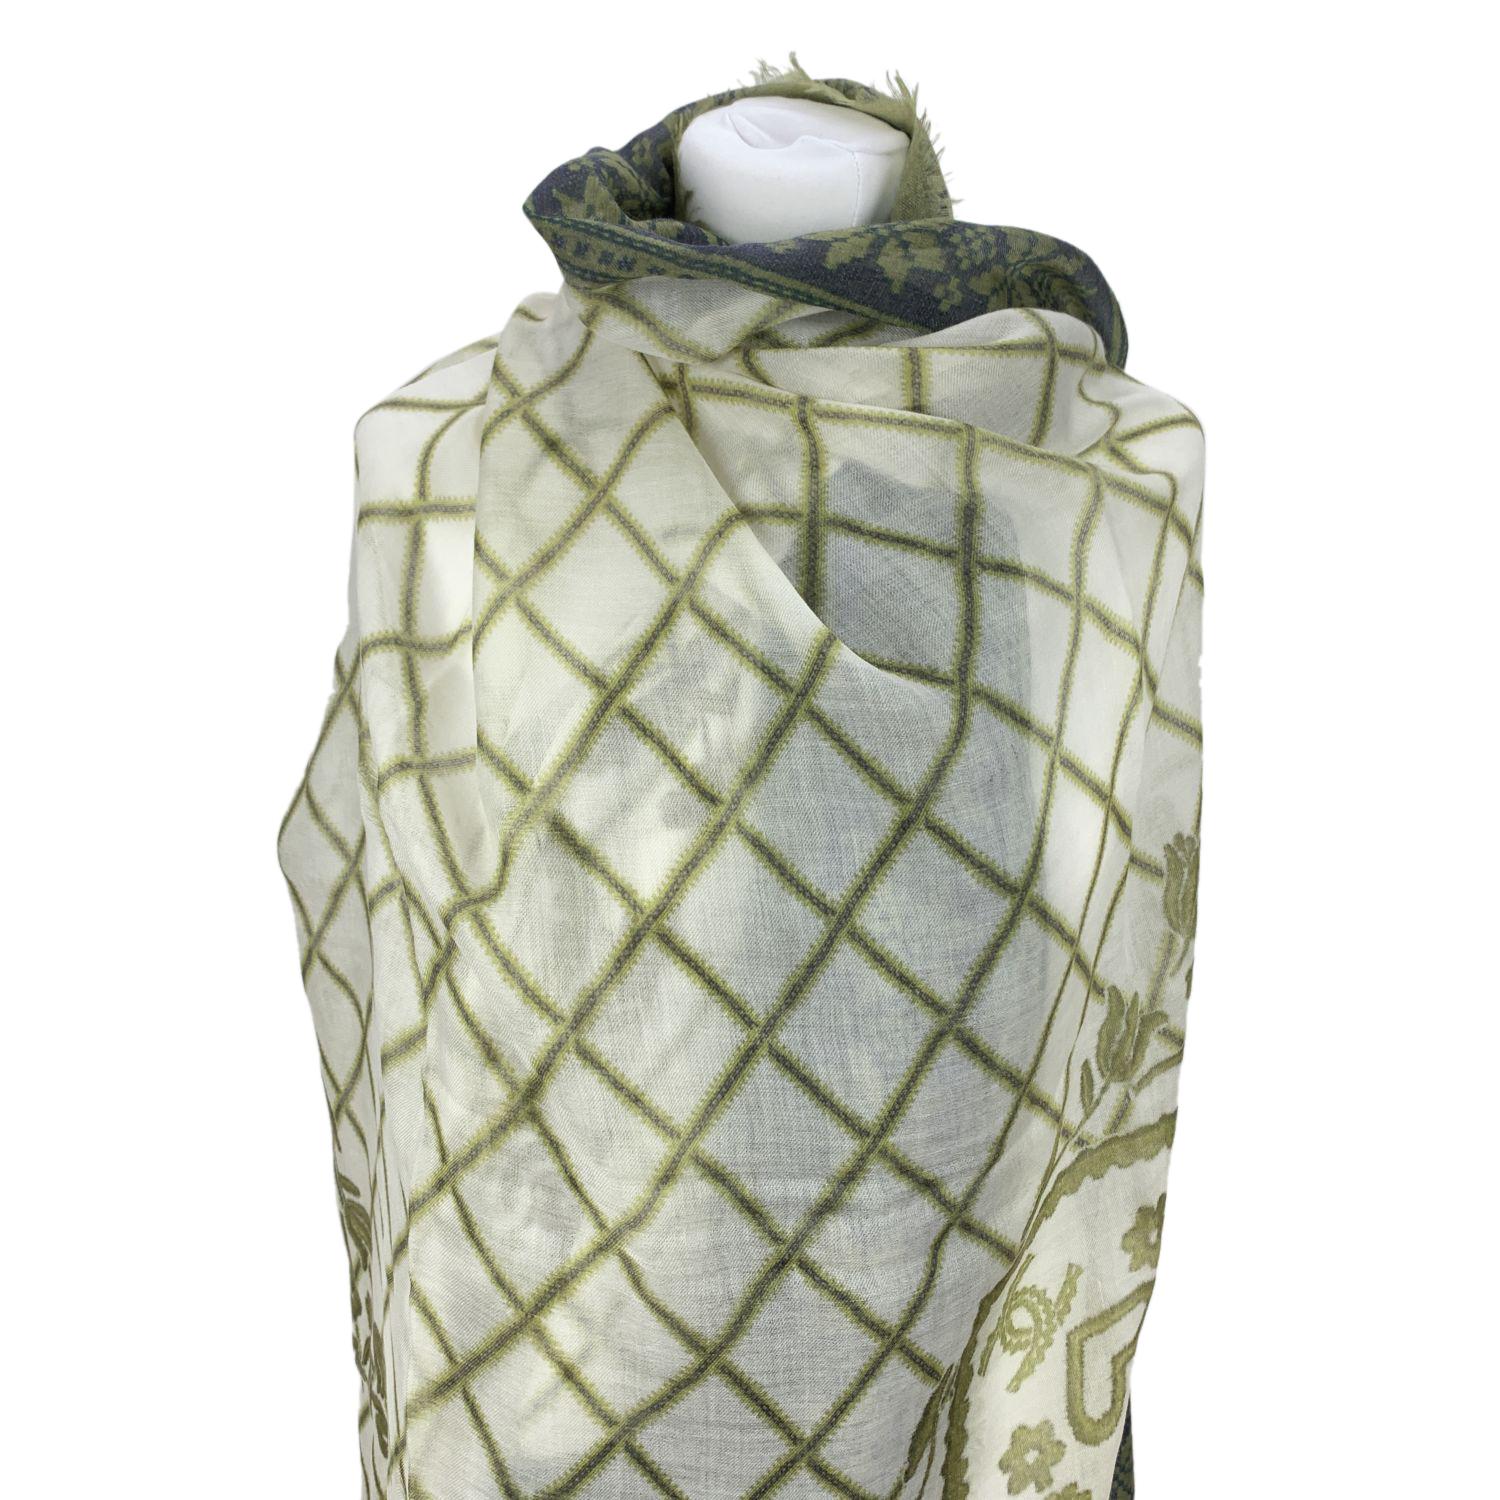 Chanel cashmere large scarf with lattice, hearts and logo prints. Green and white color. Frayed edges. Composition: 100% Cashmere. Measurements: 77 x 54 inches - 195.5 x 137.2 cm . Made in Italy

Details

MATERIAL: Cashmere

COLOR: Green

MODEL: